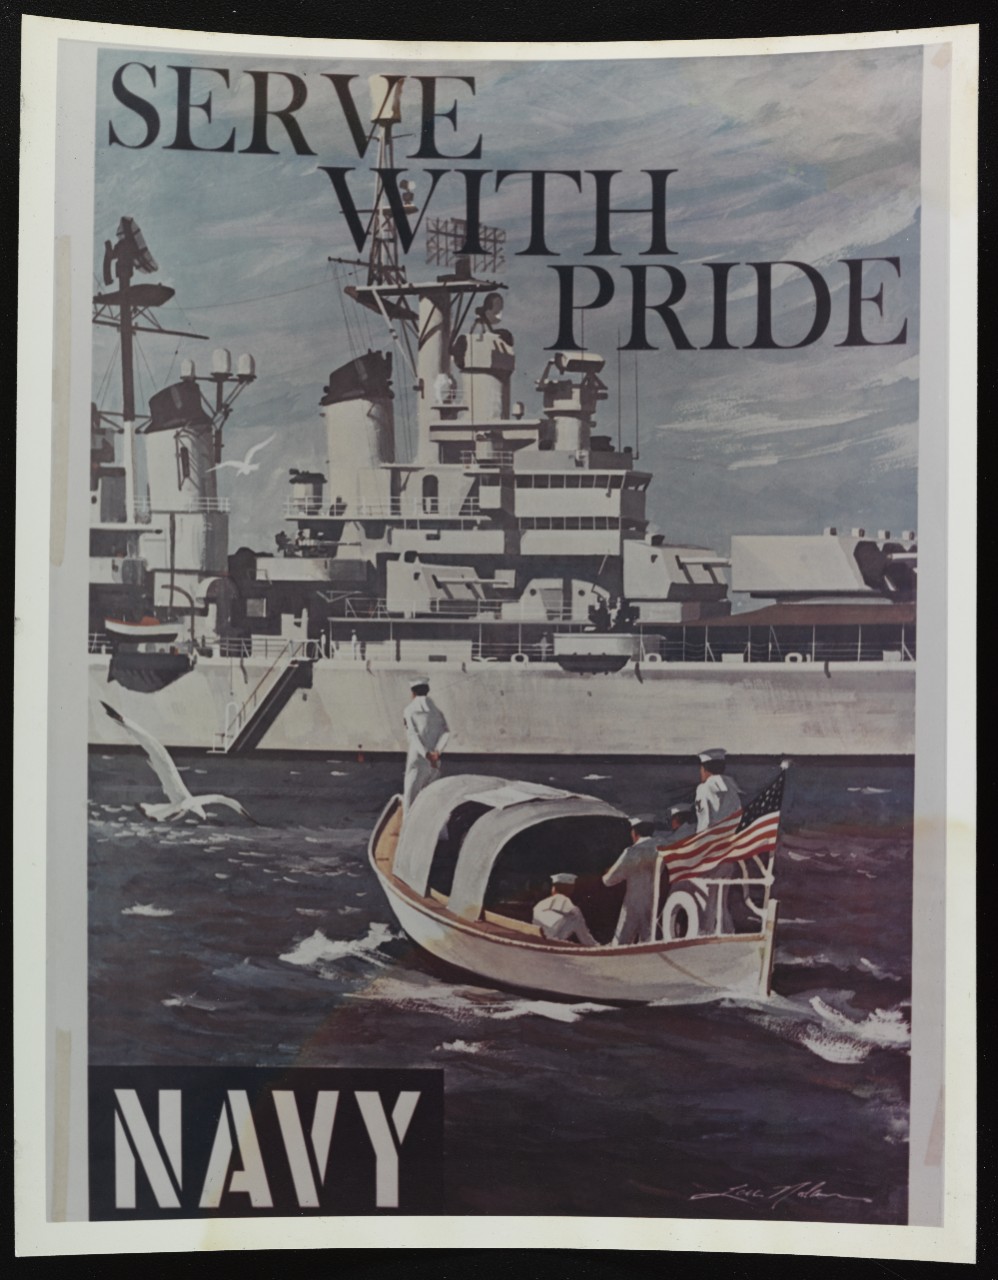 Recruiting poster:  Serve with pride